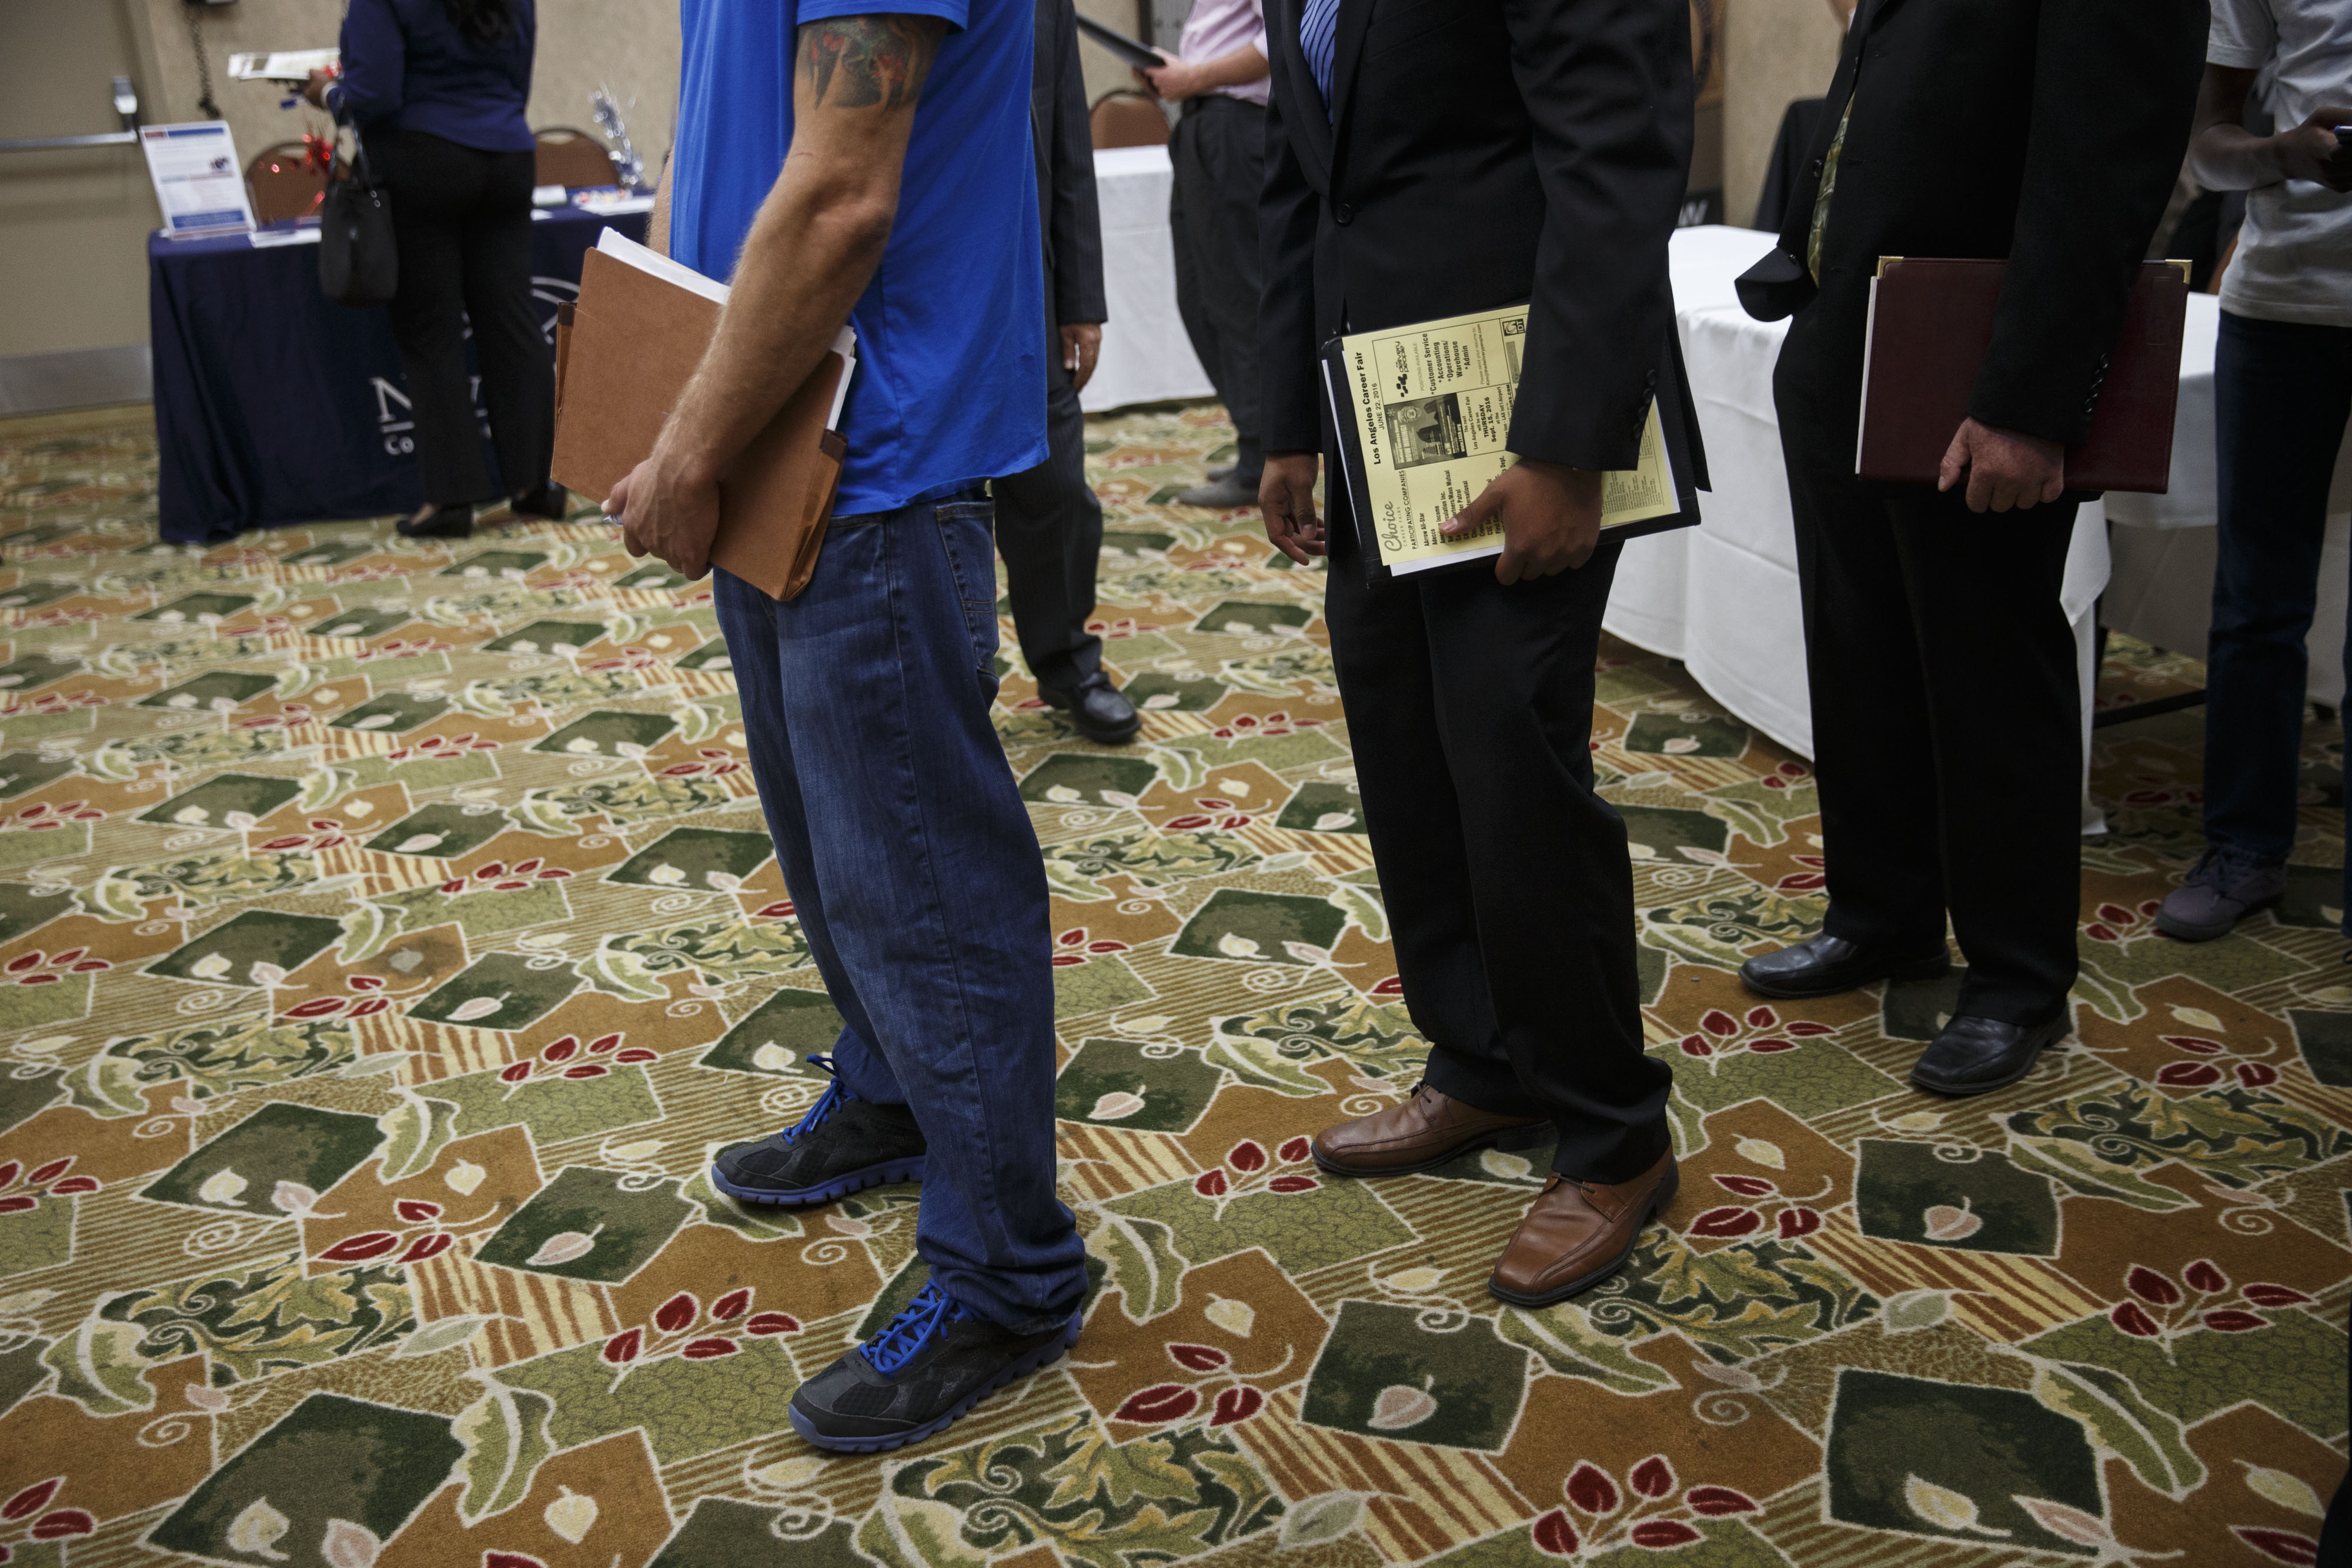 Job seekers wait in line to speak with representatives during a Choice Career Fair in Los Angeles, June 22, 2016. (Patrick T. Fallon—Bloomberg/Getty Images)